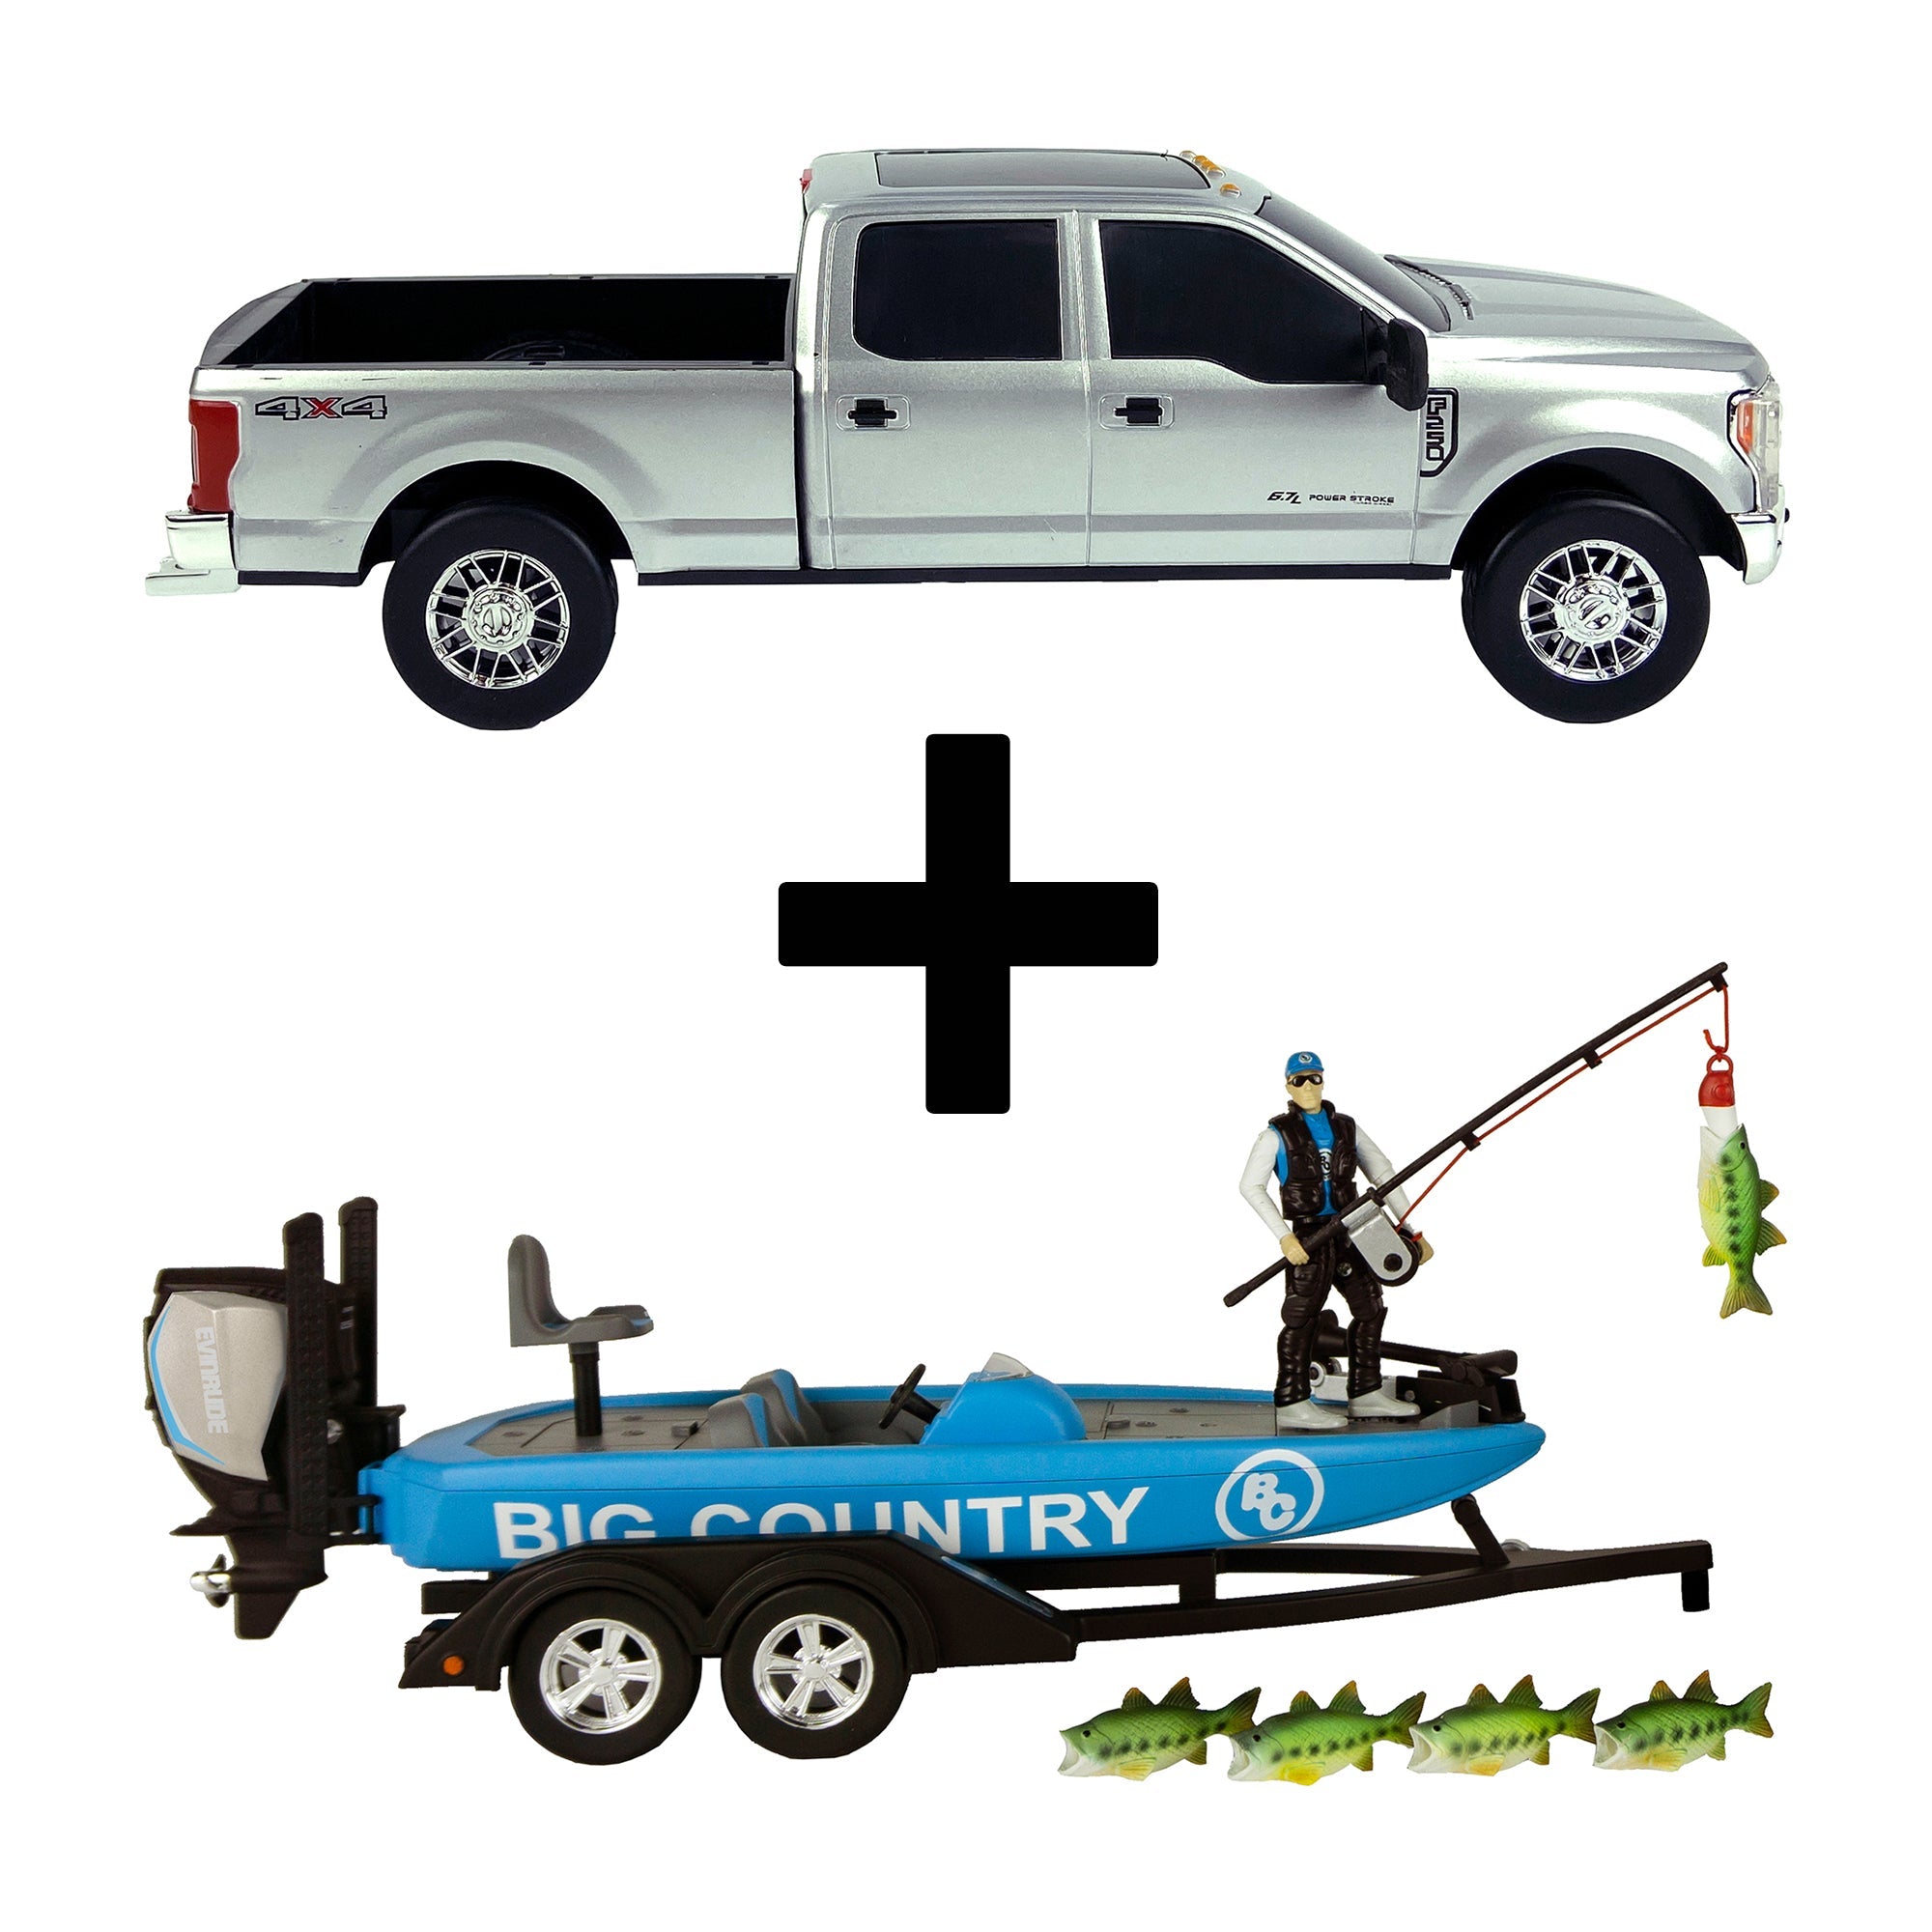 Big Country Toys  Ford Super Duty F-250 & Bass Boat Bundle